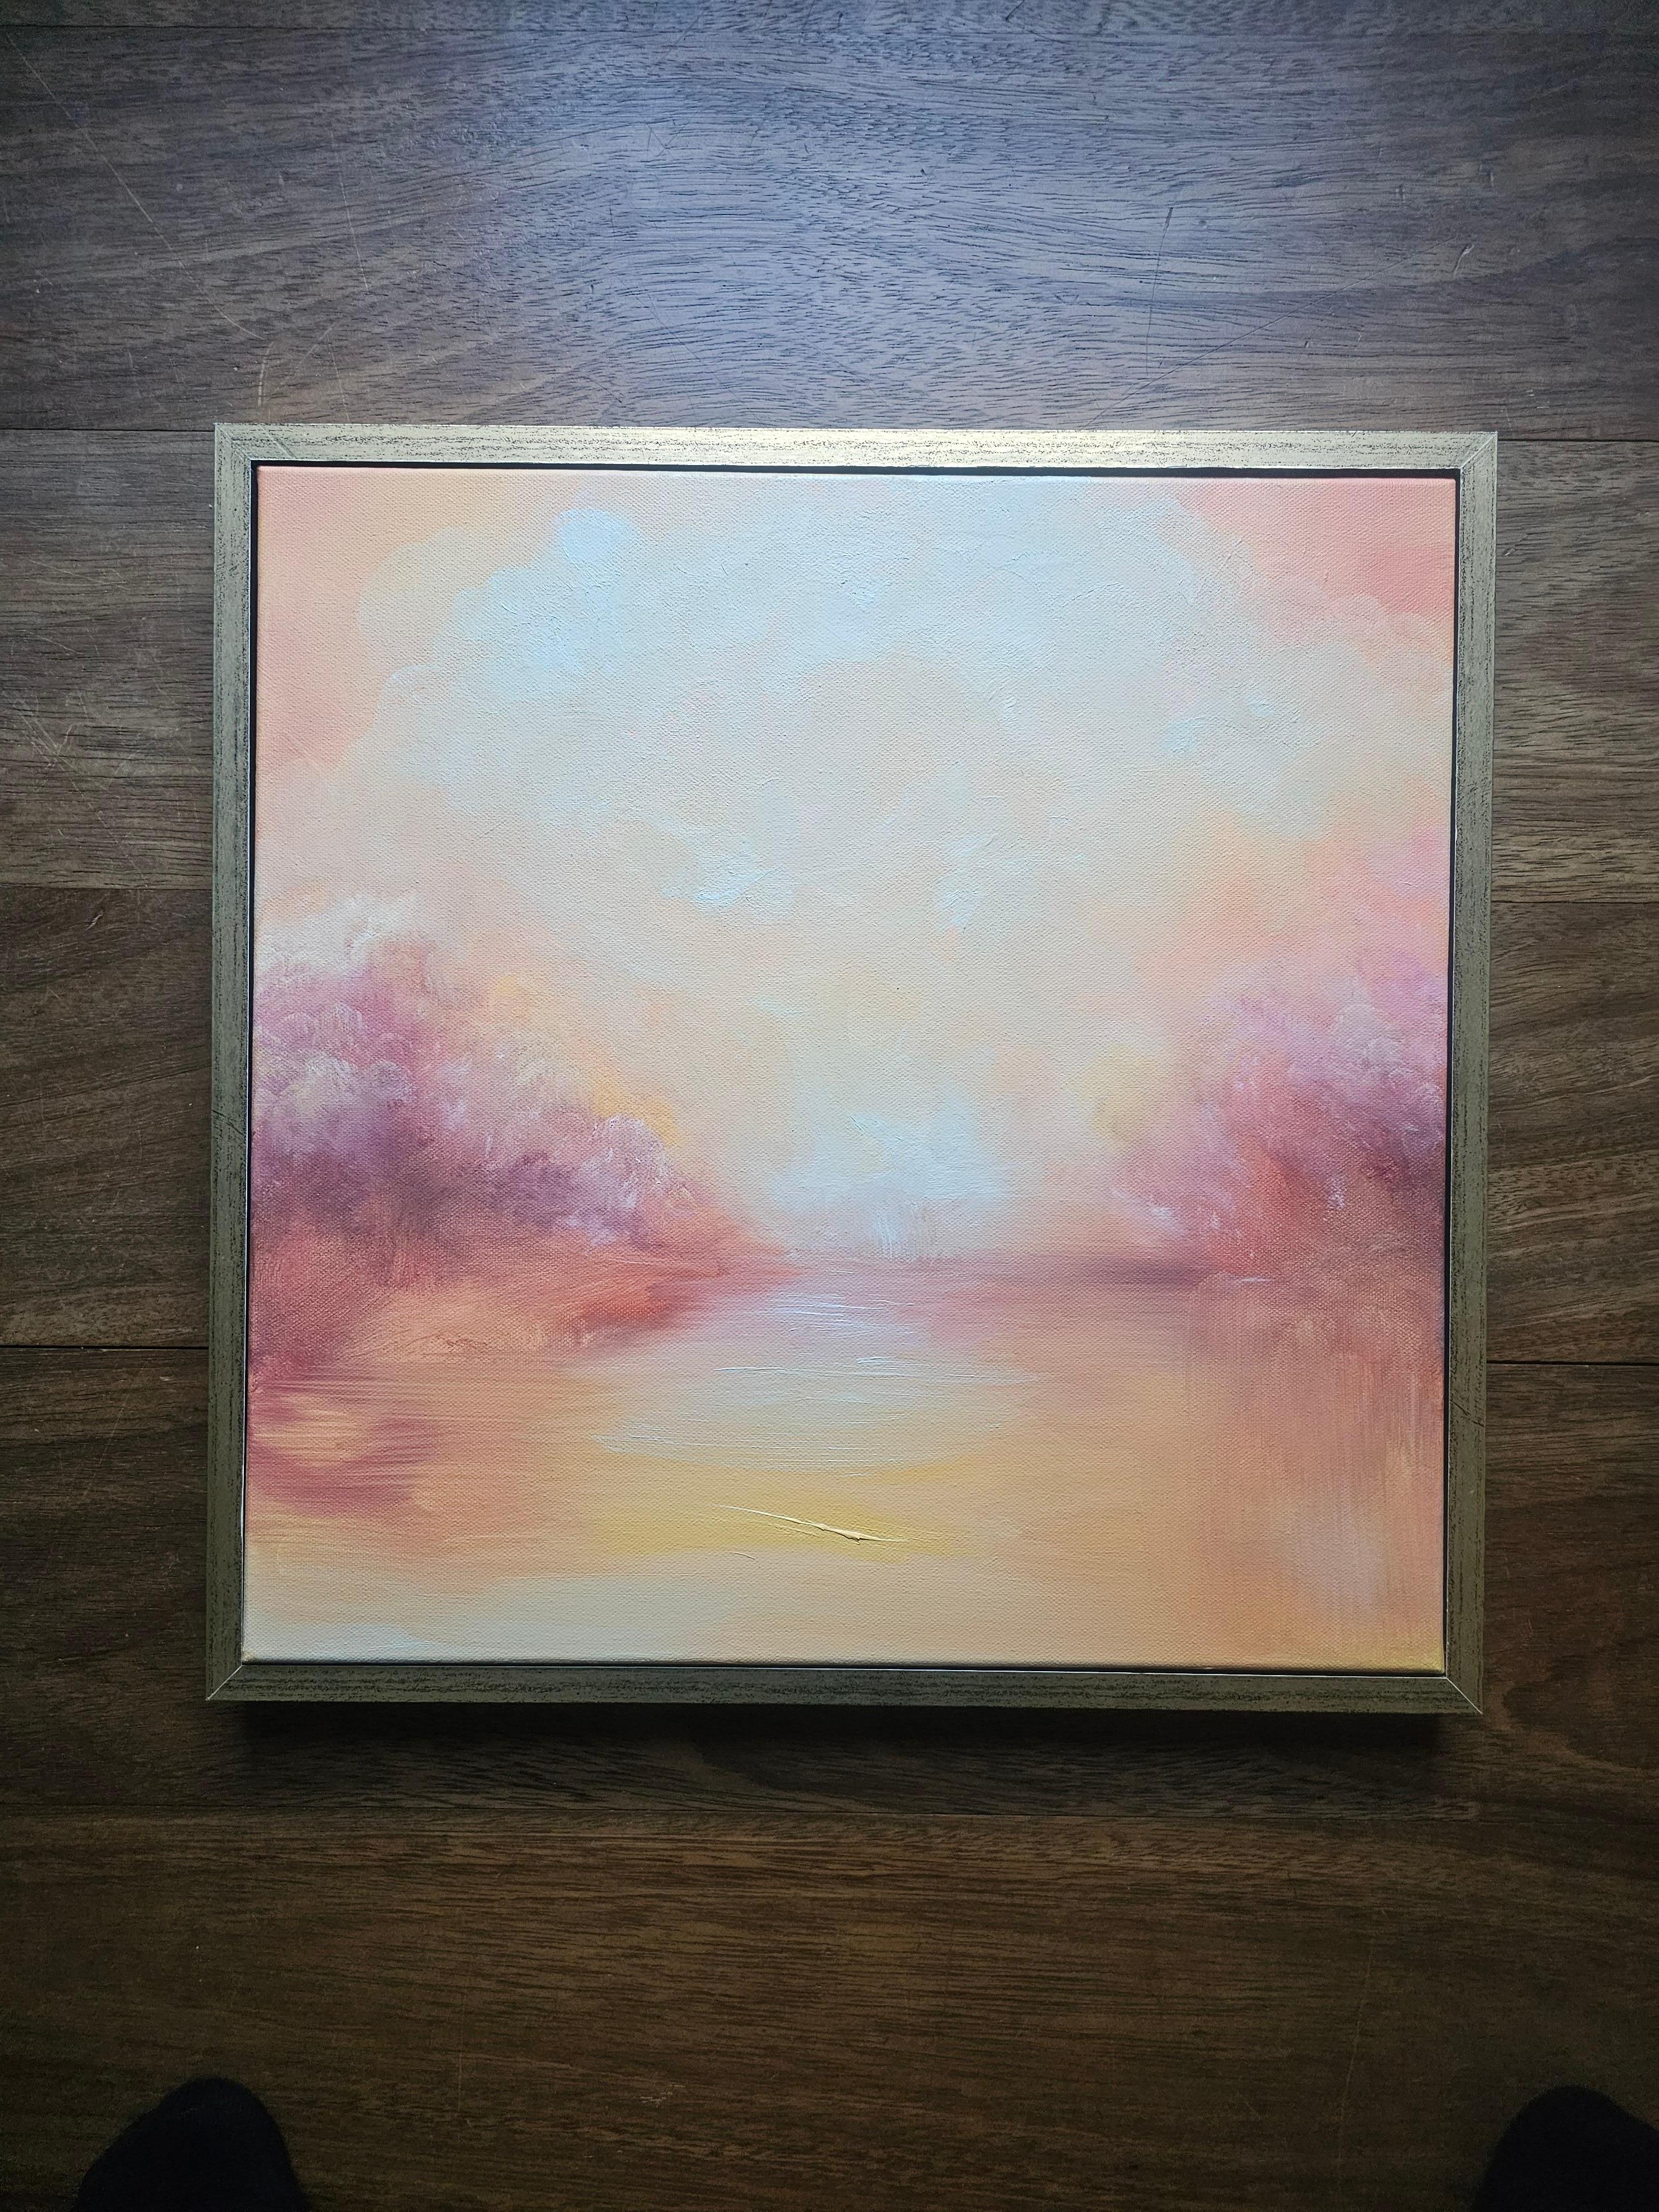 And then there was light - Abstract gold and orange sunset landscape painting - Brown Landscape Painting by Jennifer L. Baker